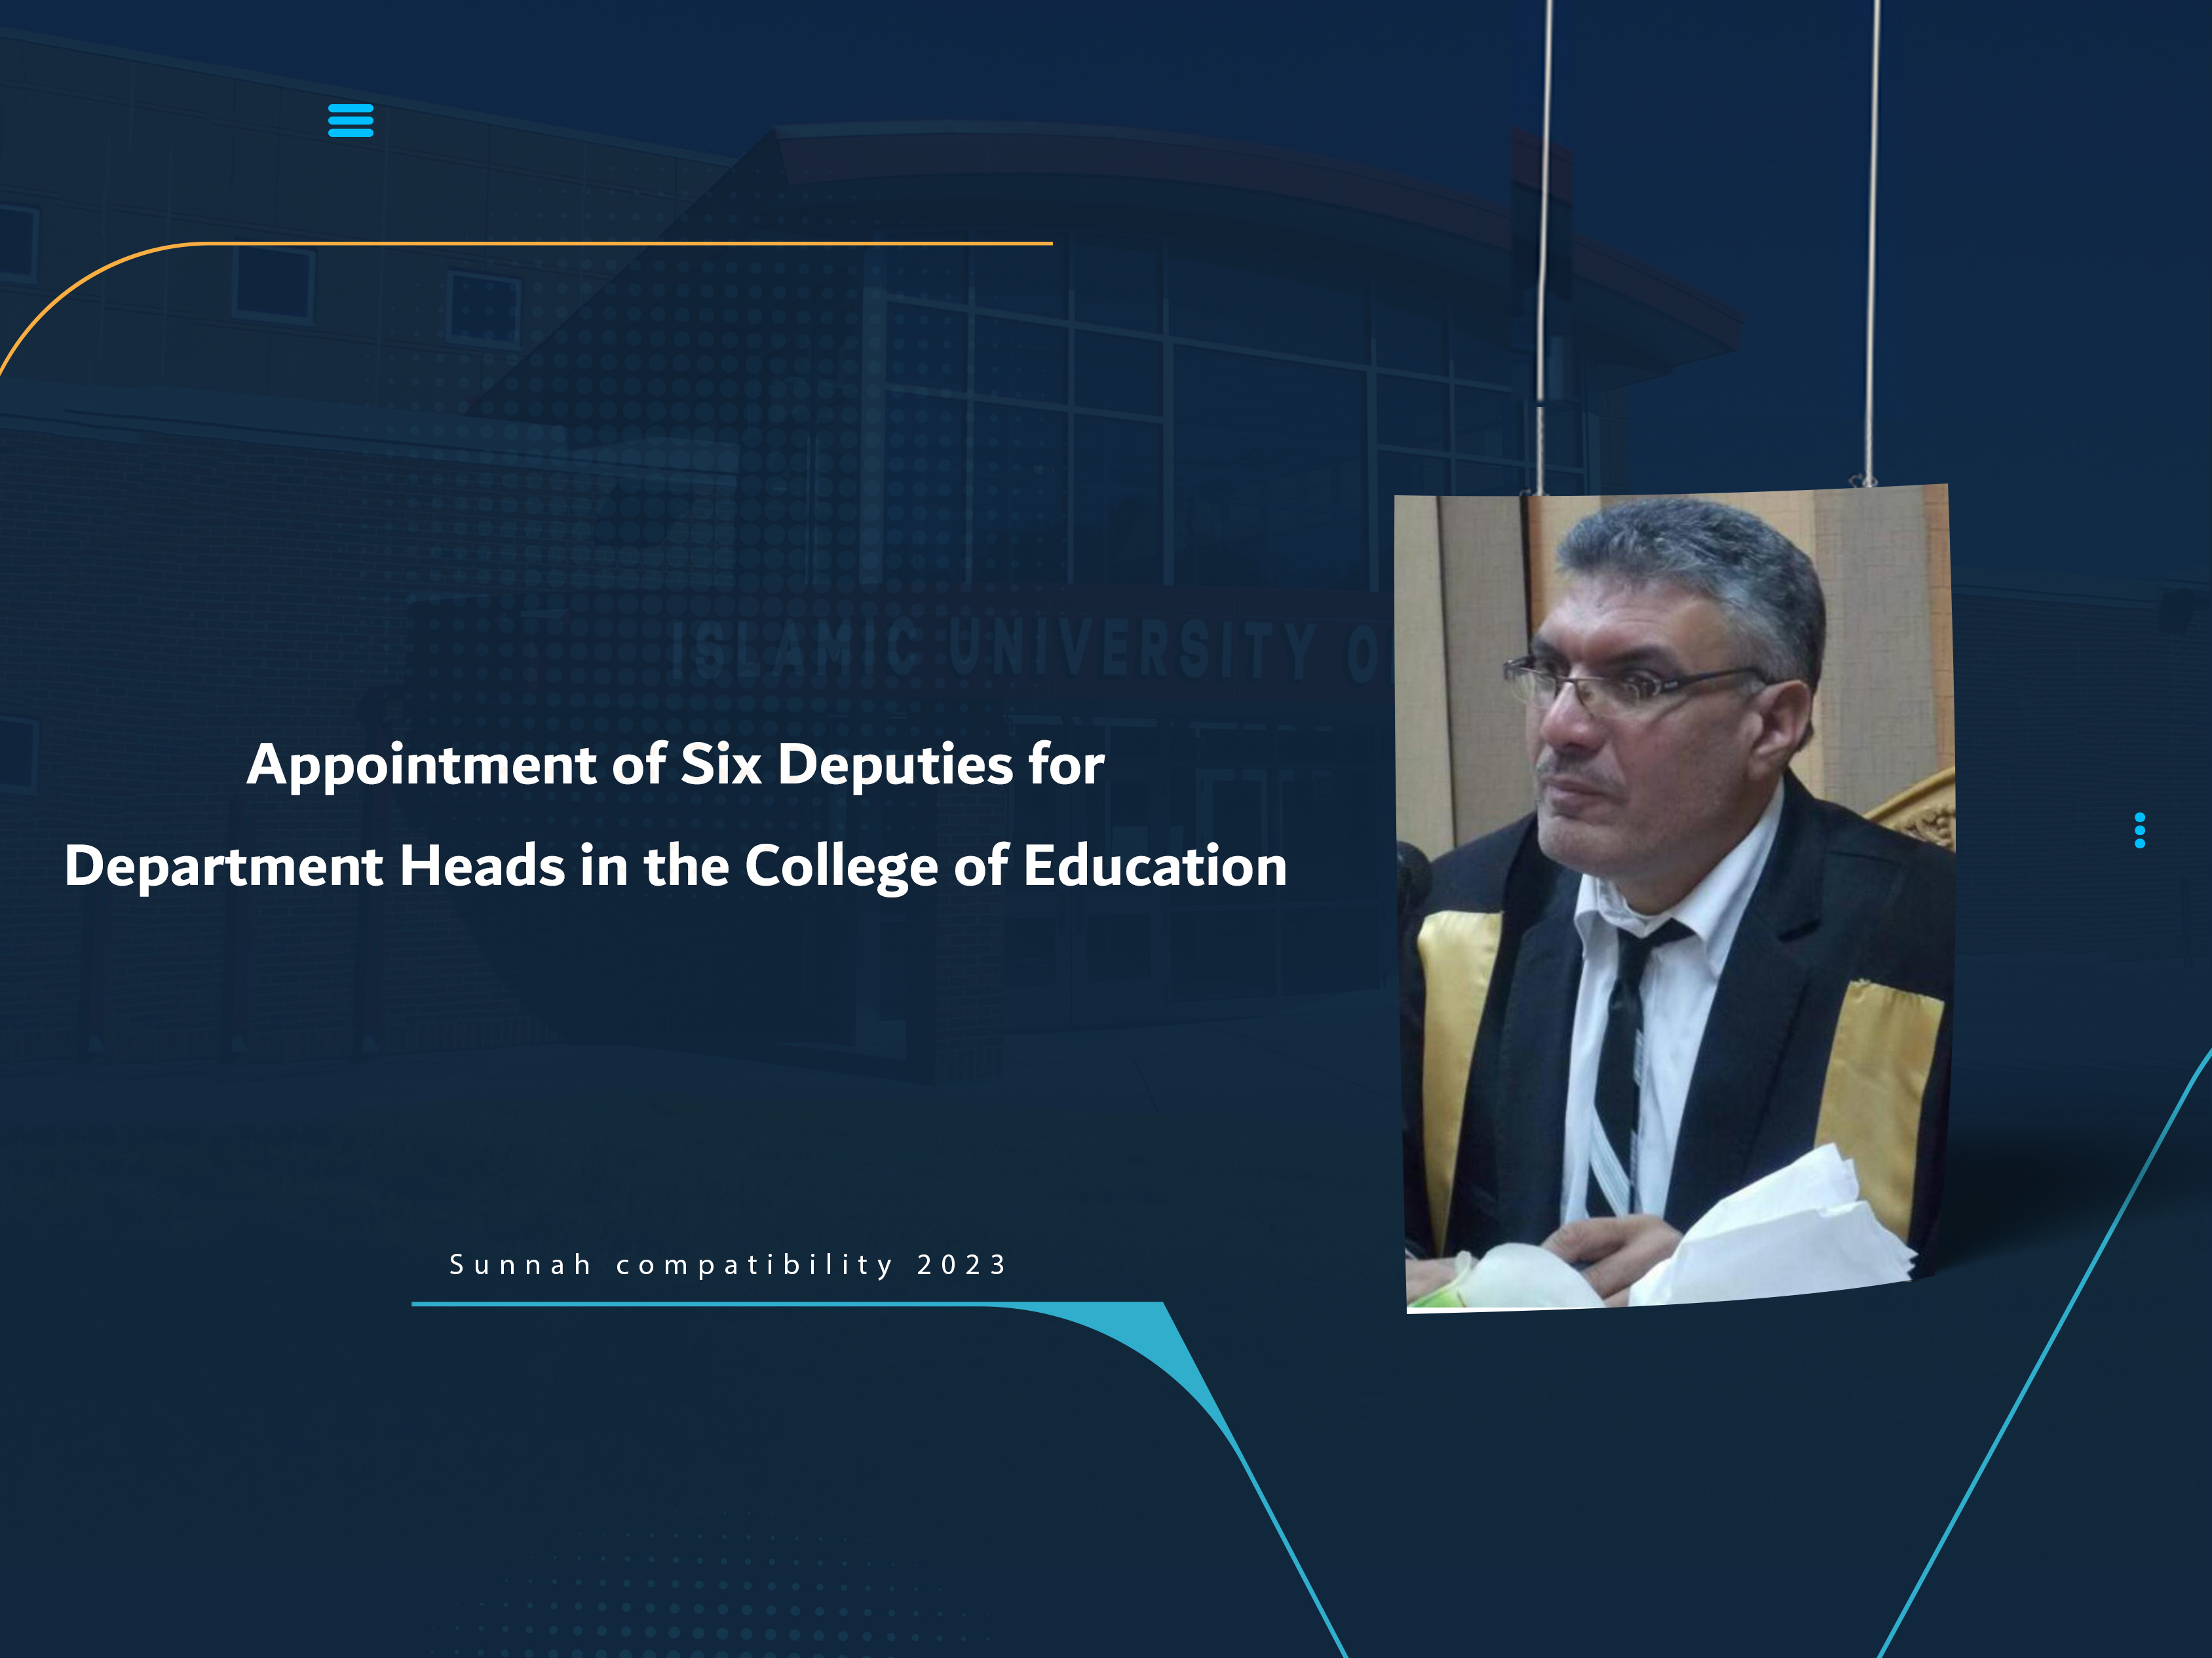 Appointment of Six Deputies for Department Heads in the College of Education